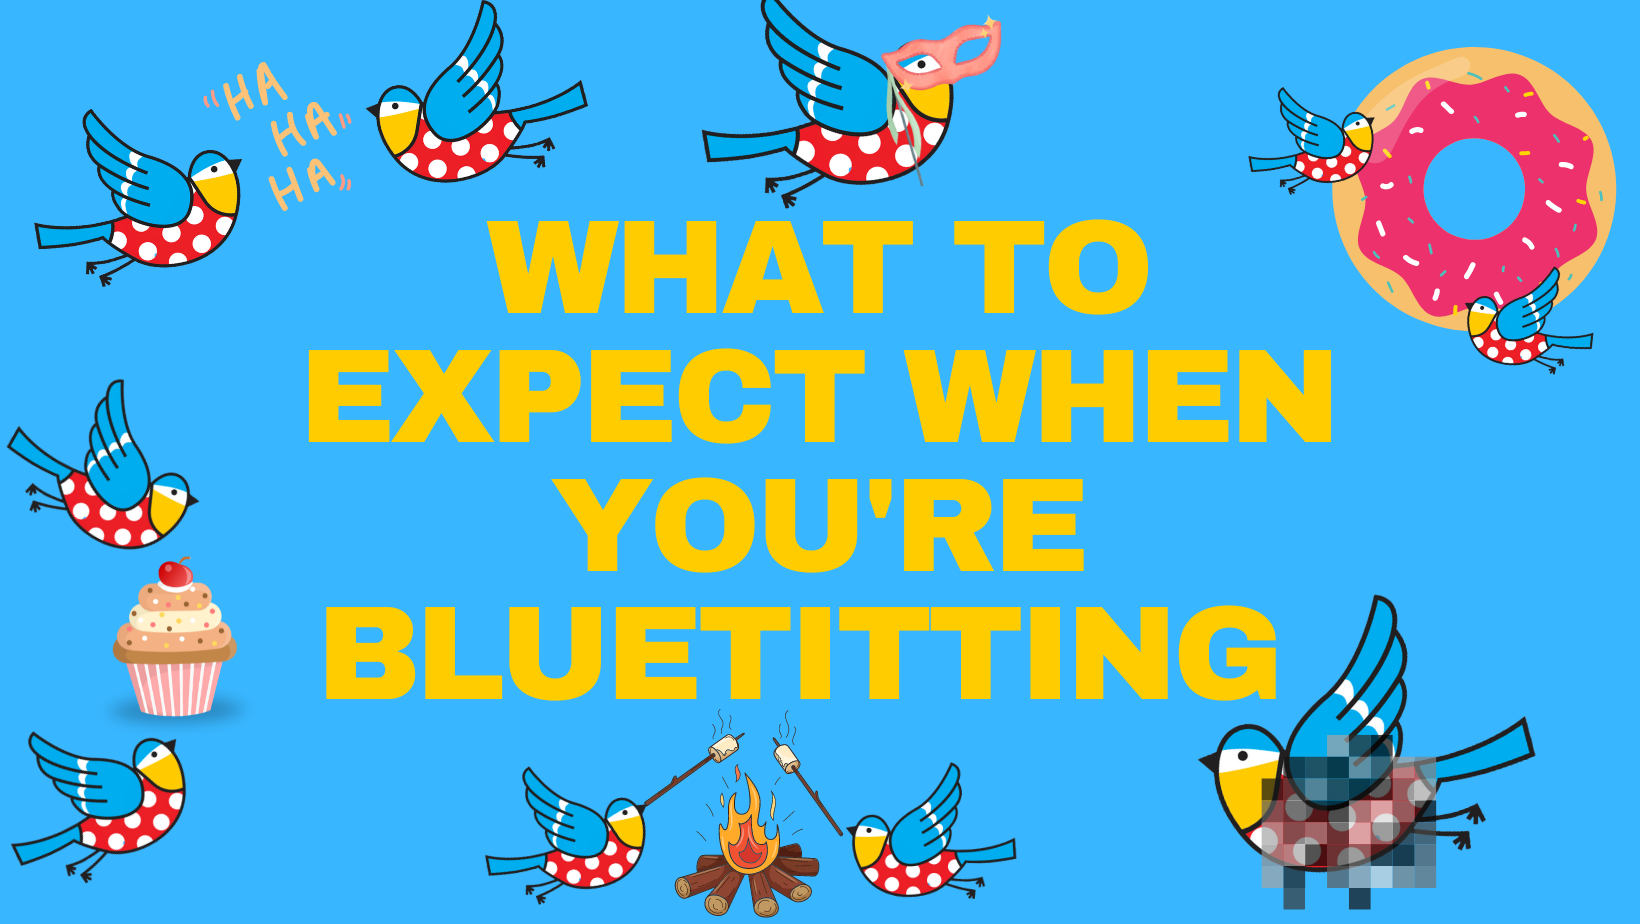 What To Expect When You're Bluetitting